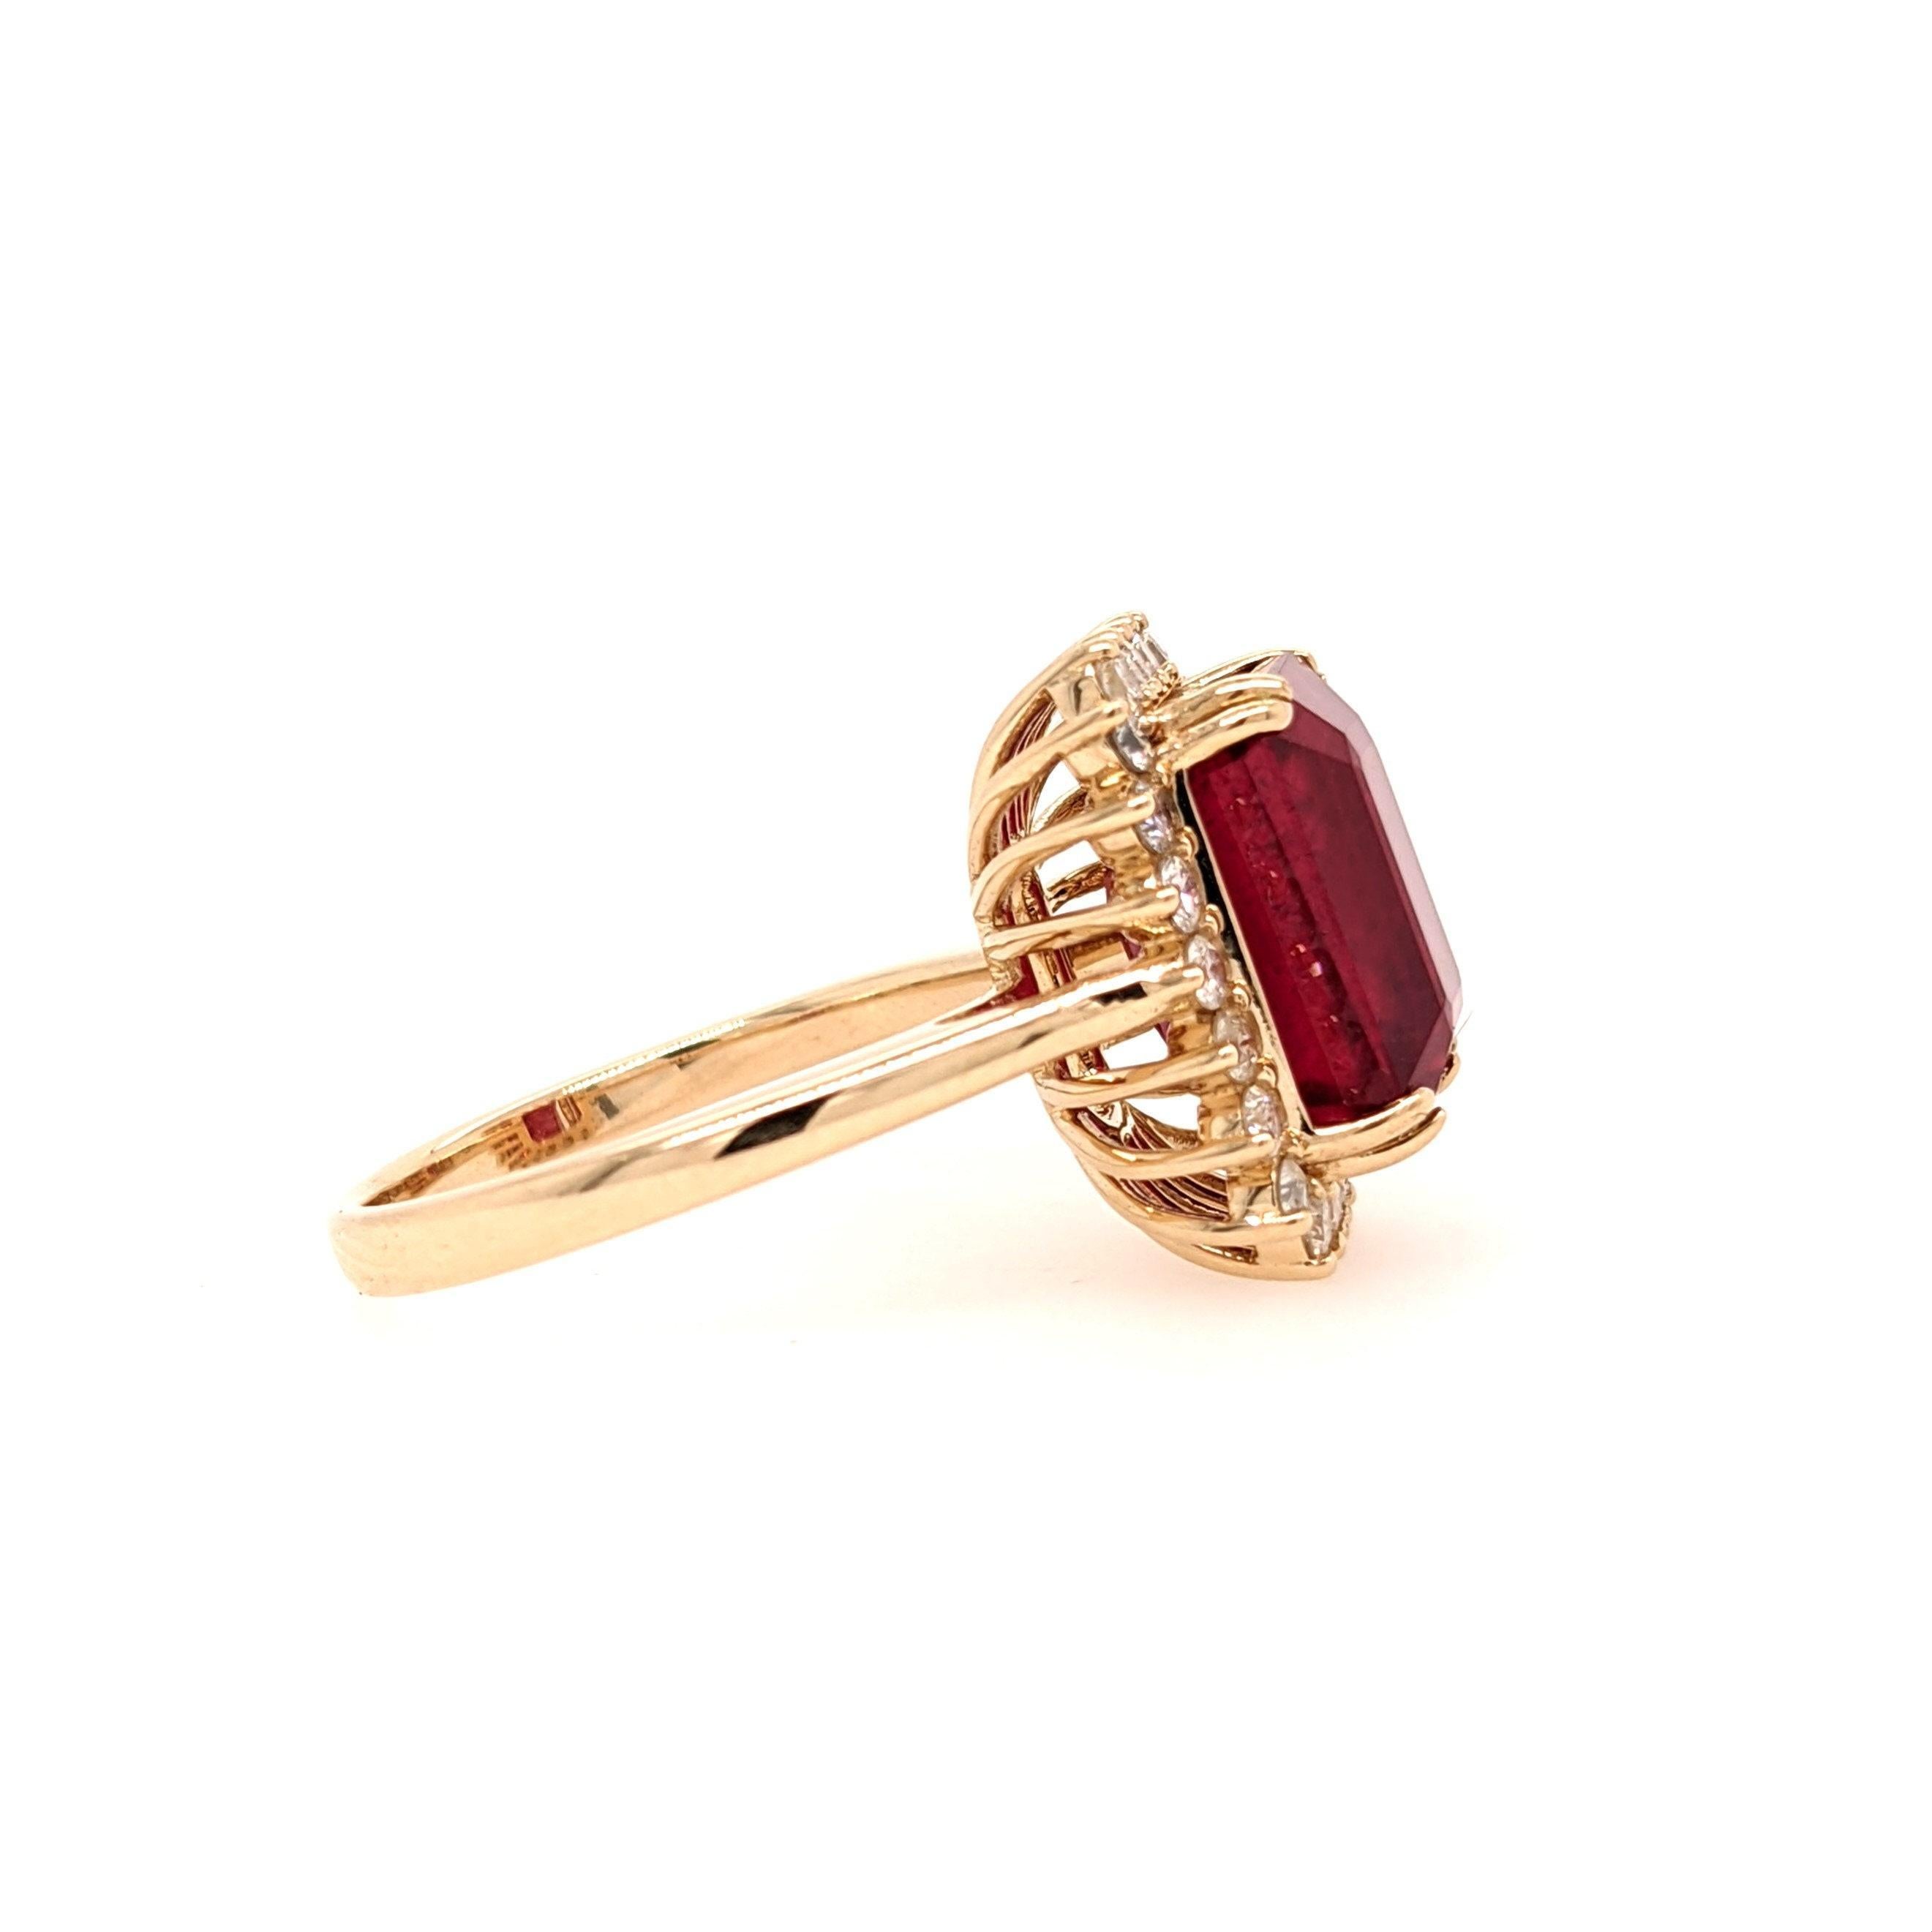 Emerald Cut 8 Carat Ruby Ring w a Natural Diamond Halo in Solid 14K Yellow Gold For Sale